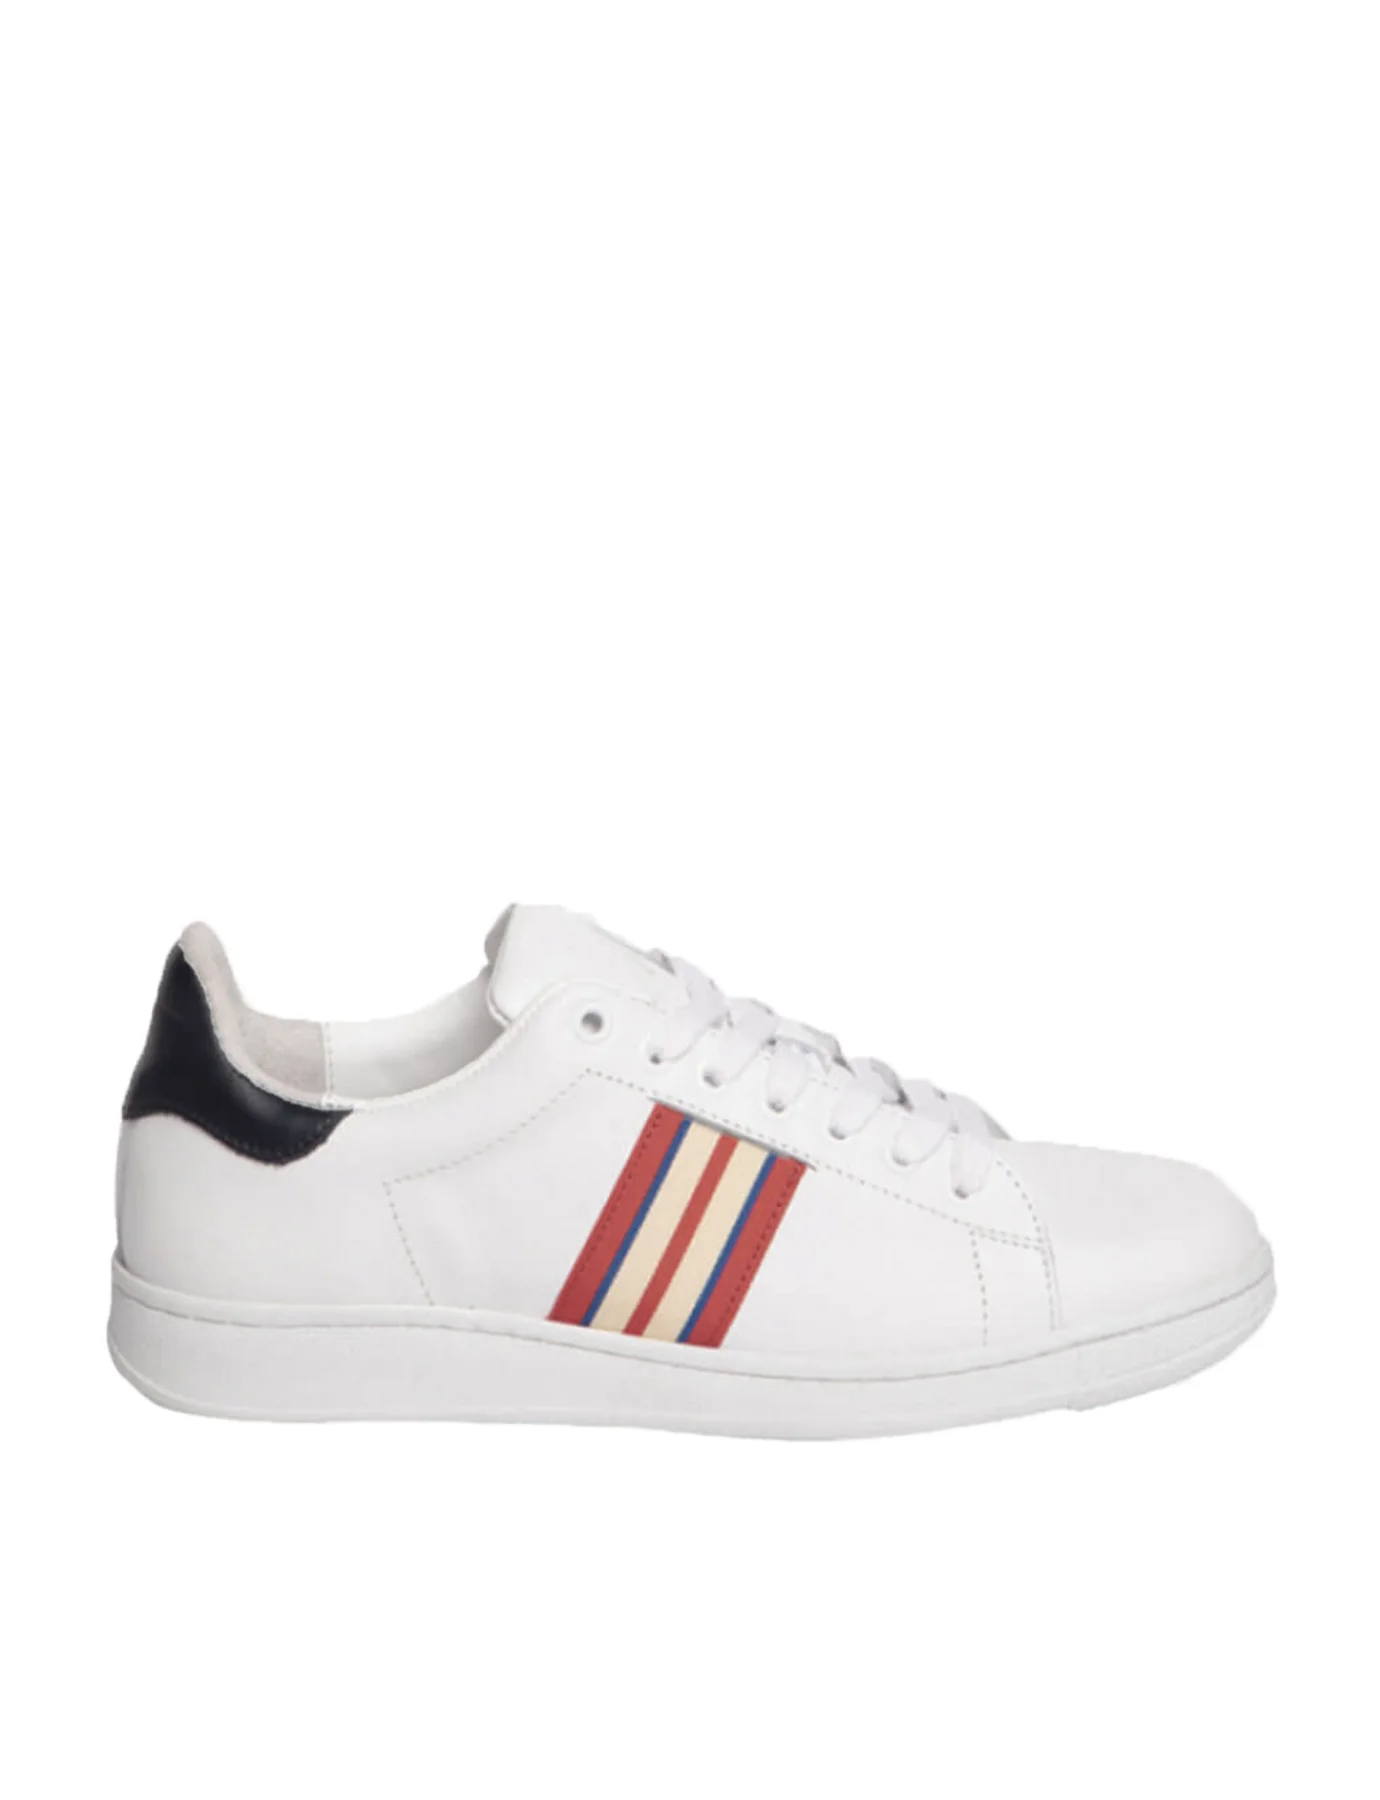 sneakers-charly-gallone-tricolore